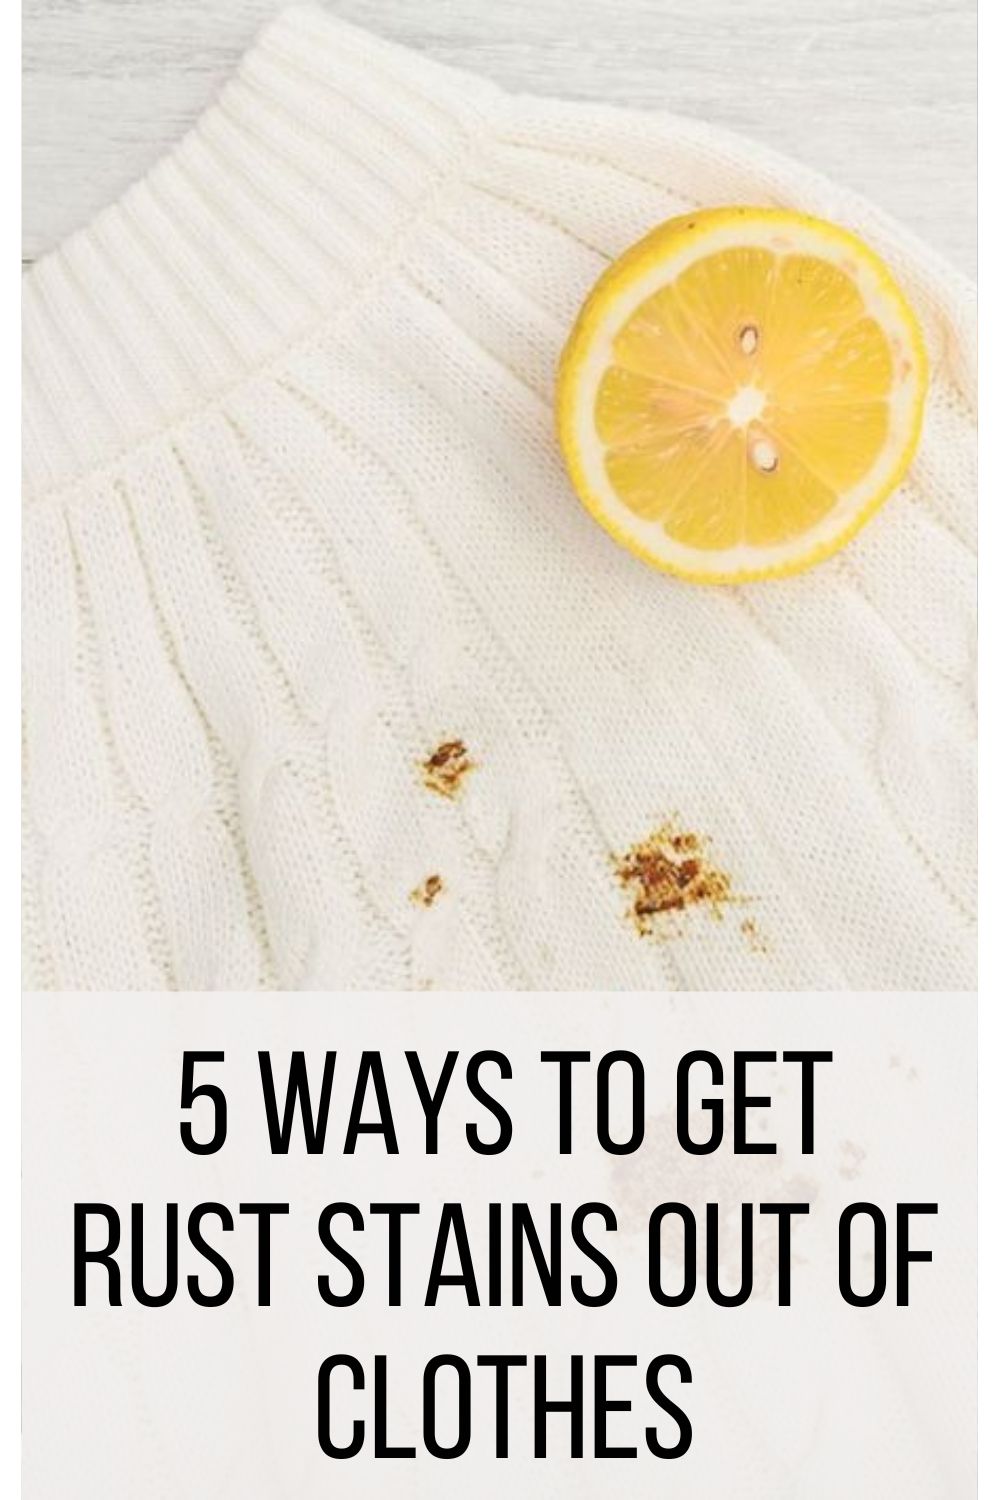 5 Ways to Get Rust Stains Out of Clothes (Step By Step Guide)